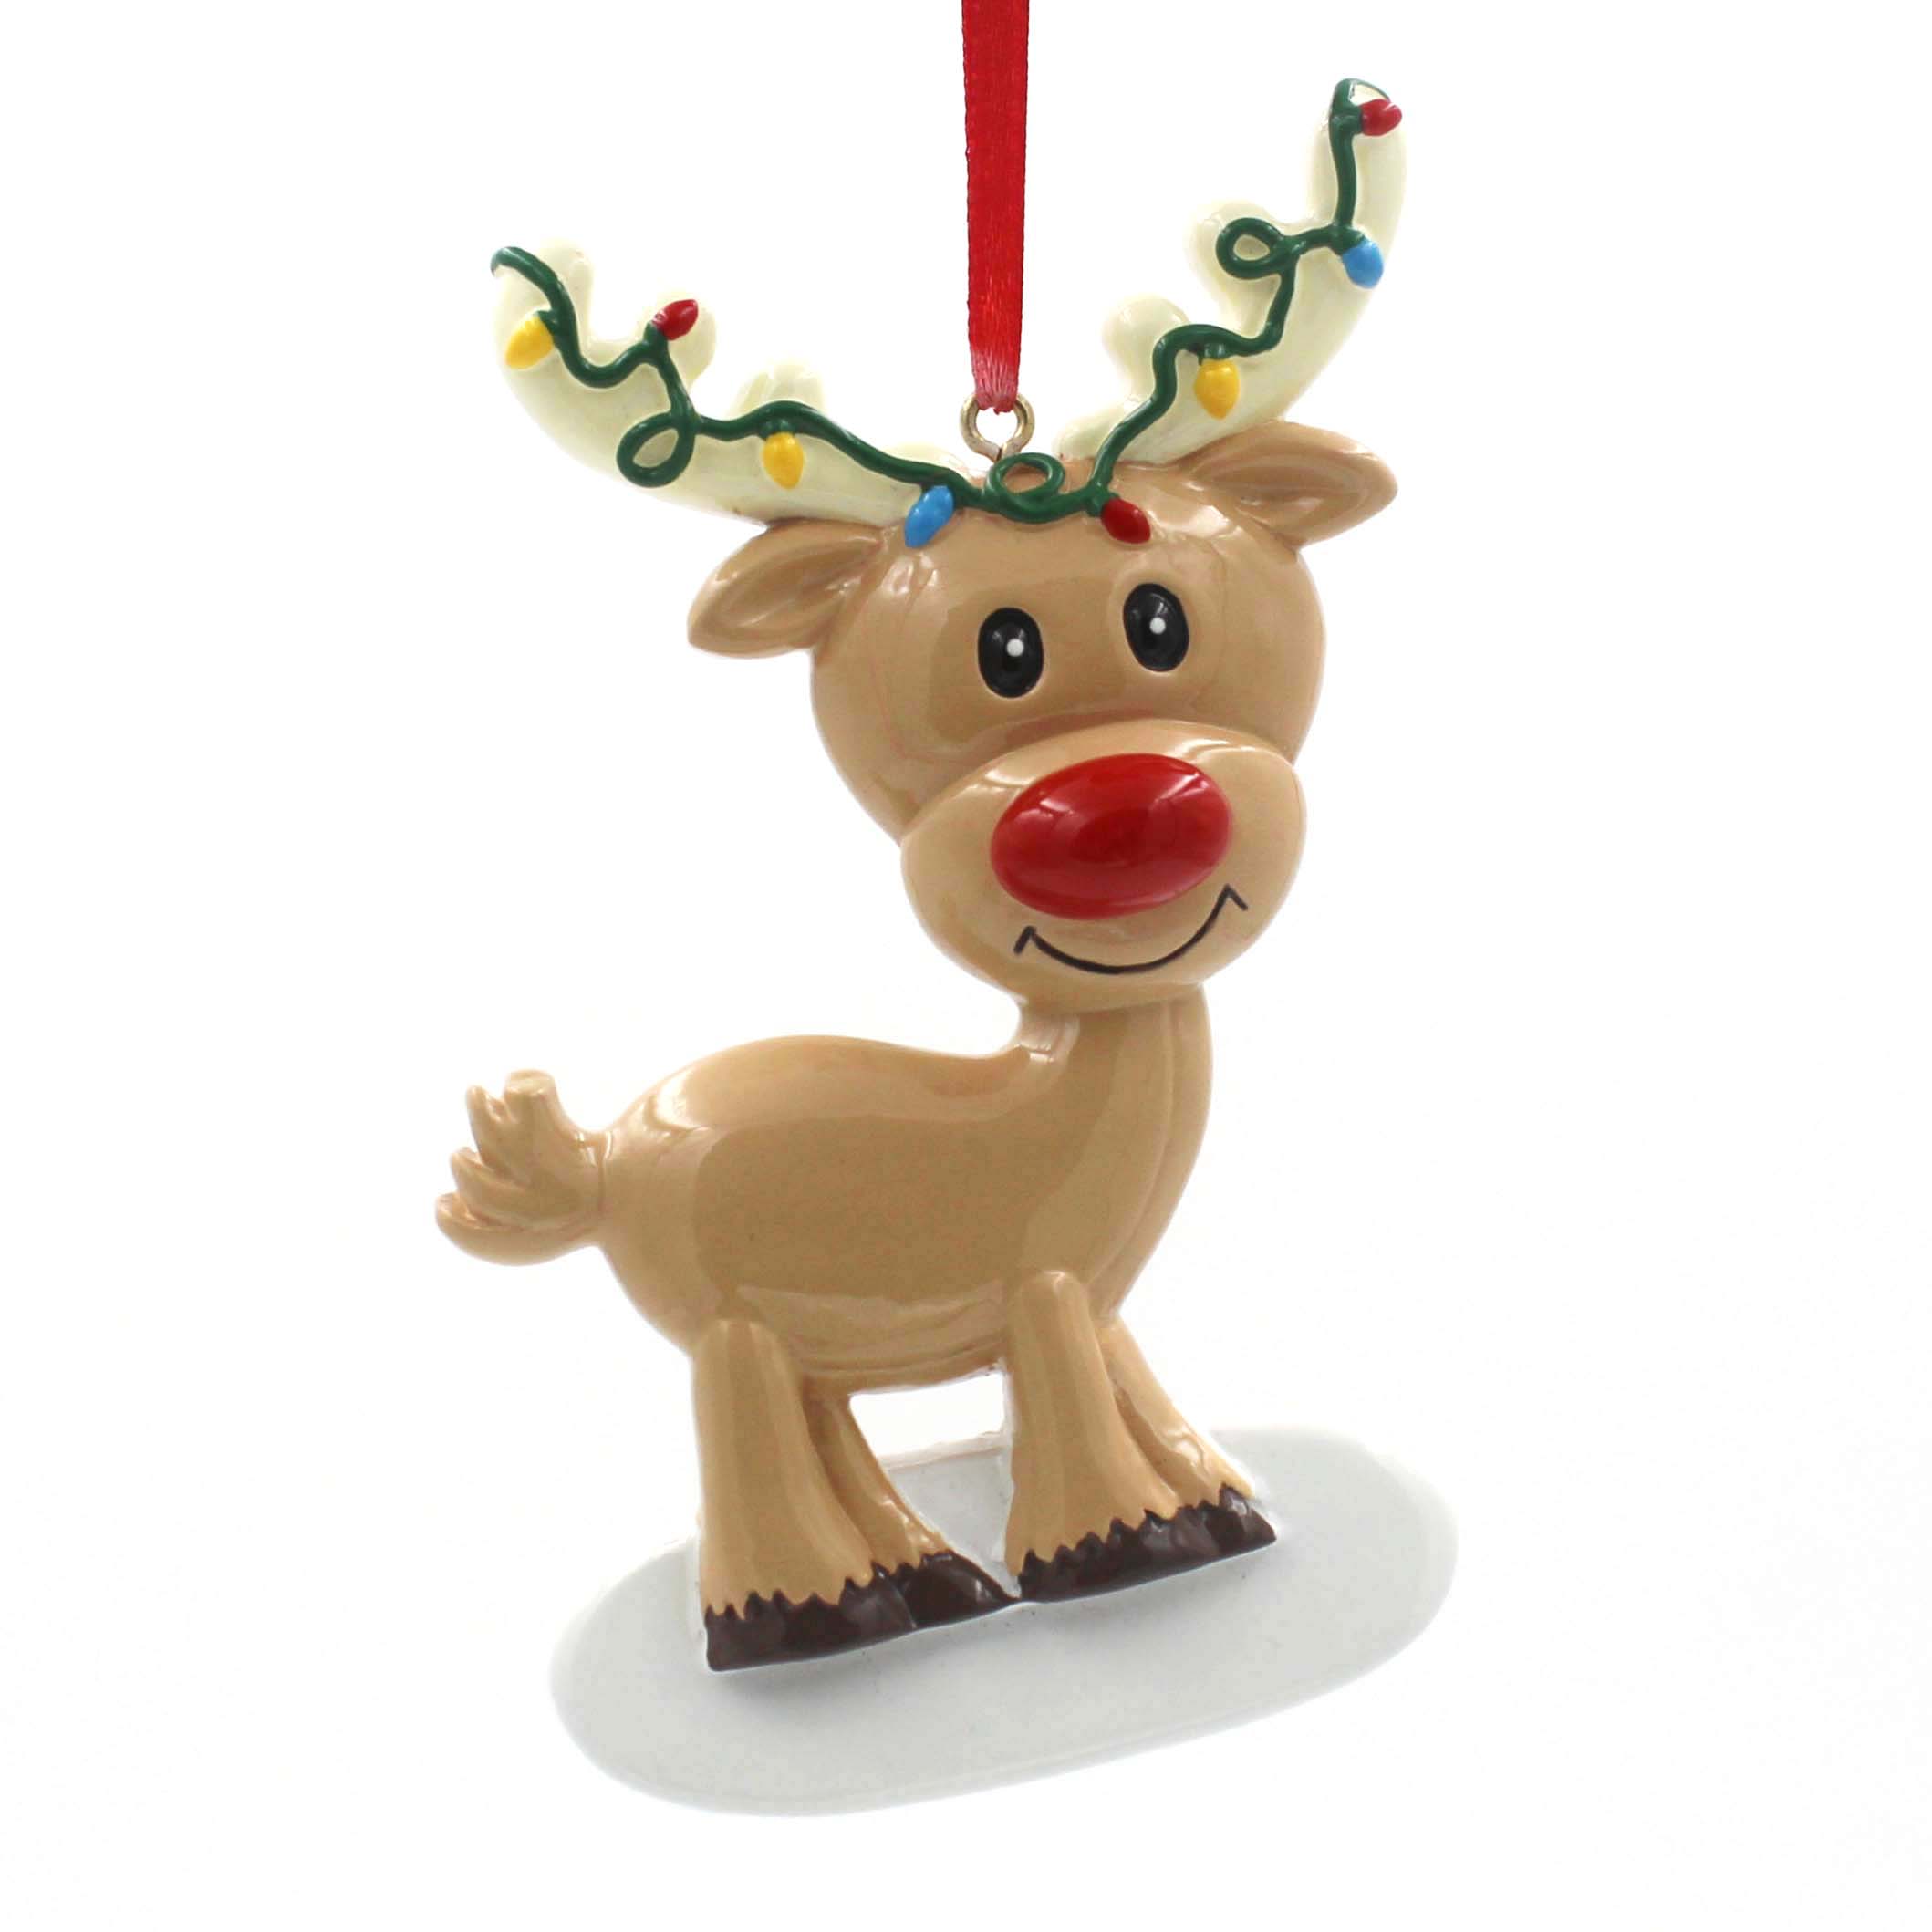 Reindeer Ornaments Personalized Christmas Tree Ornament